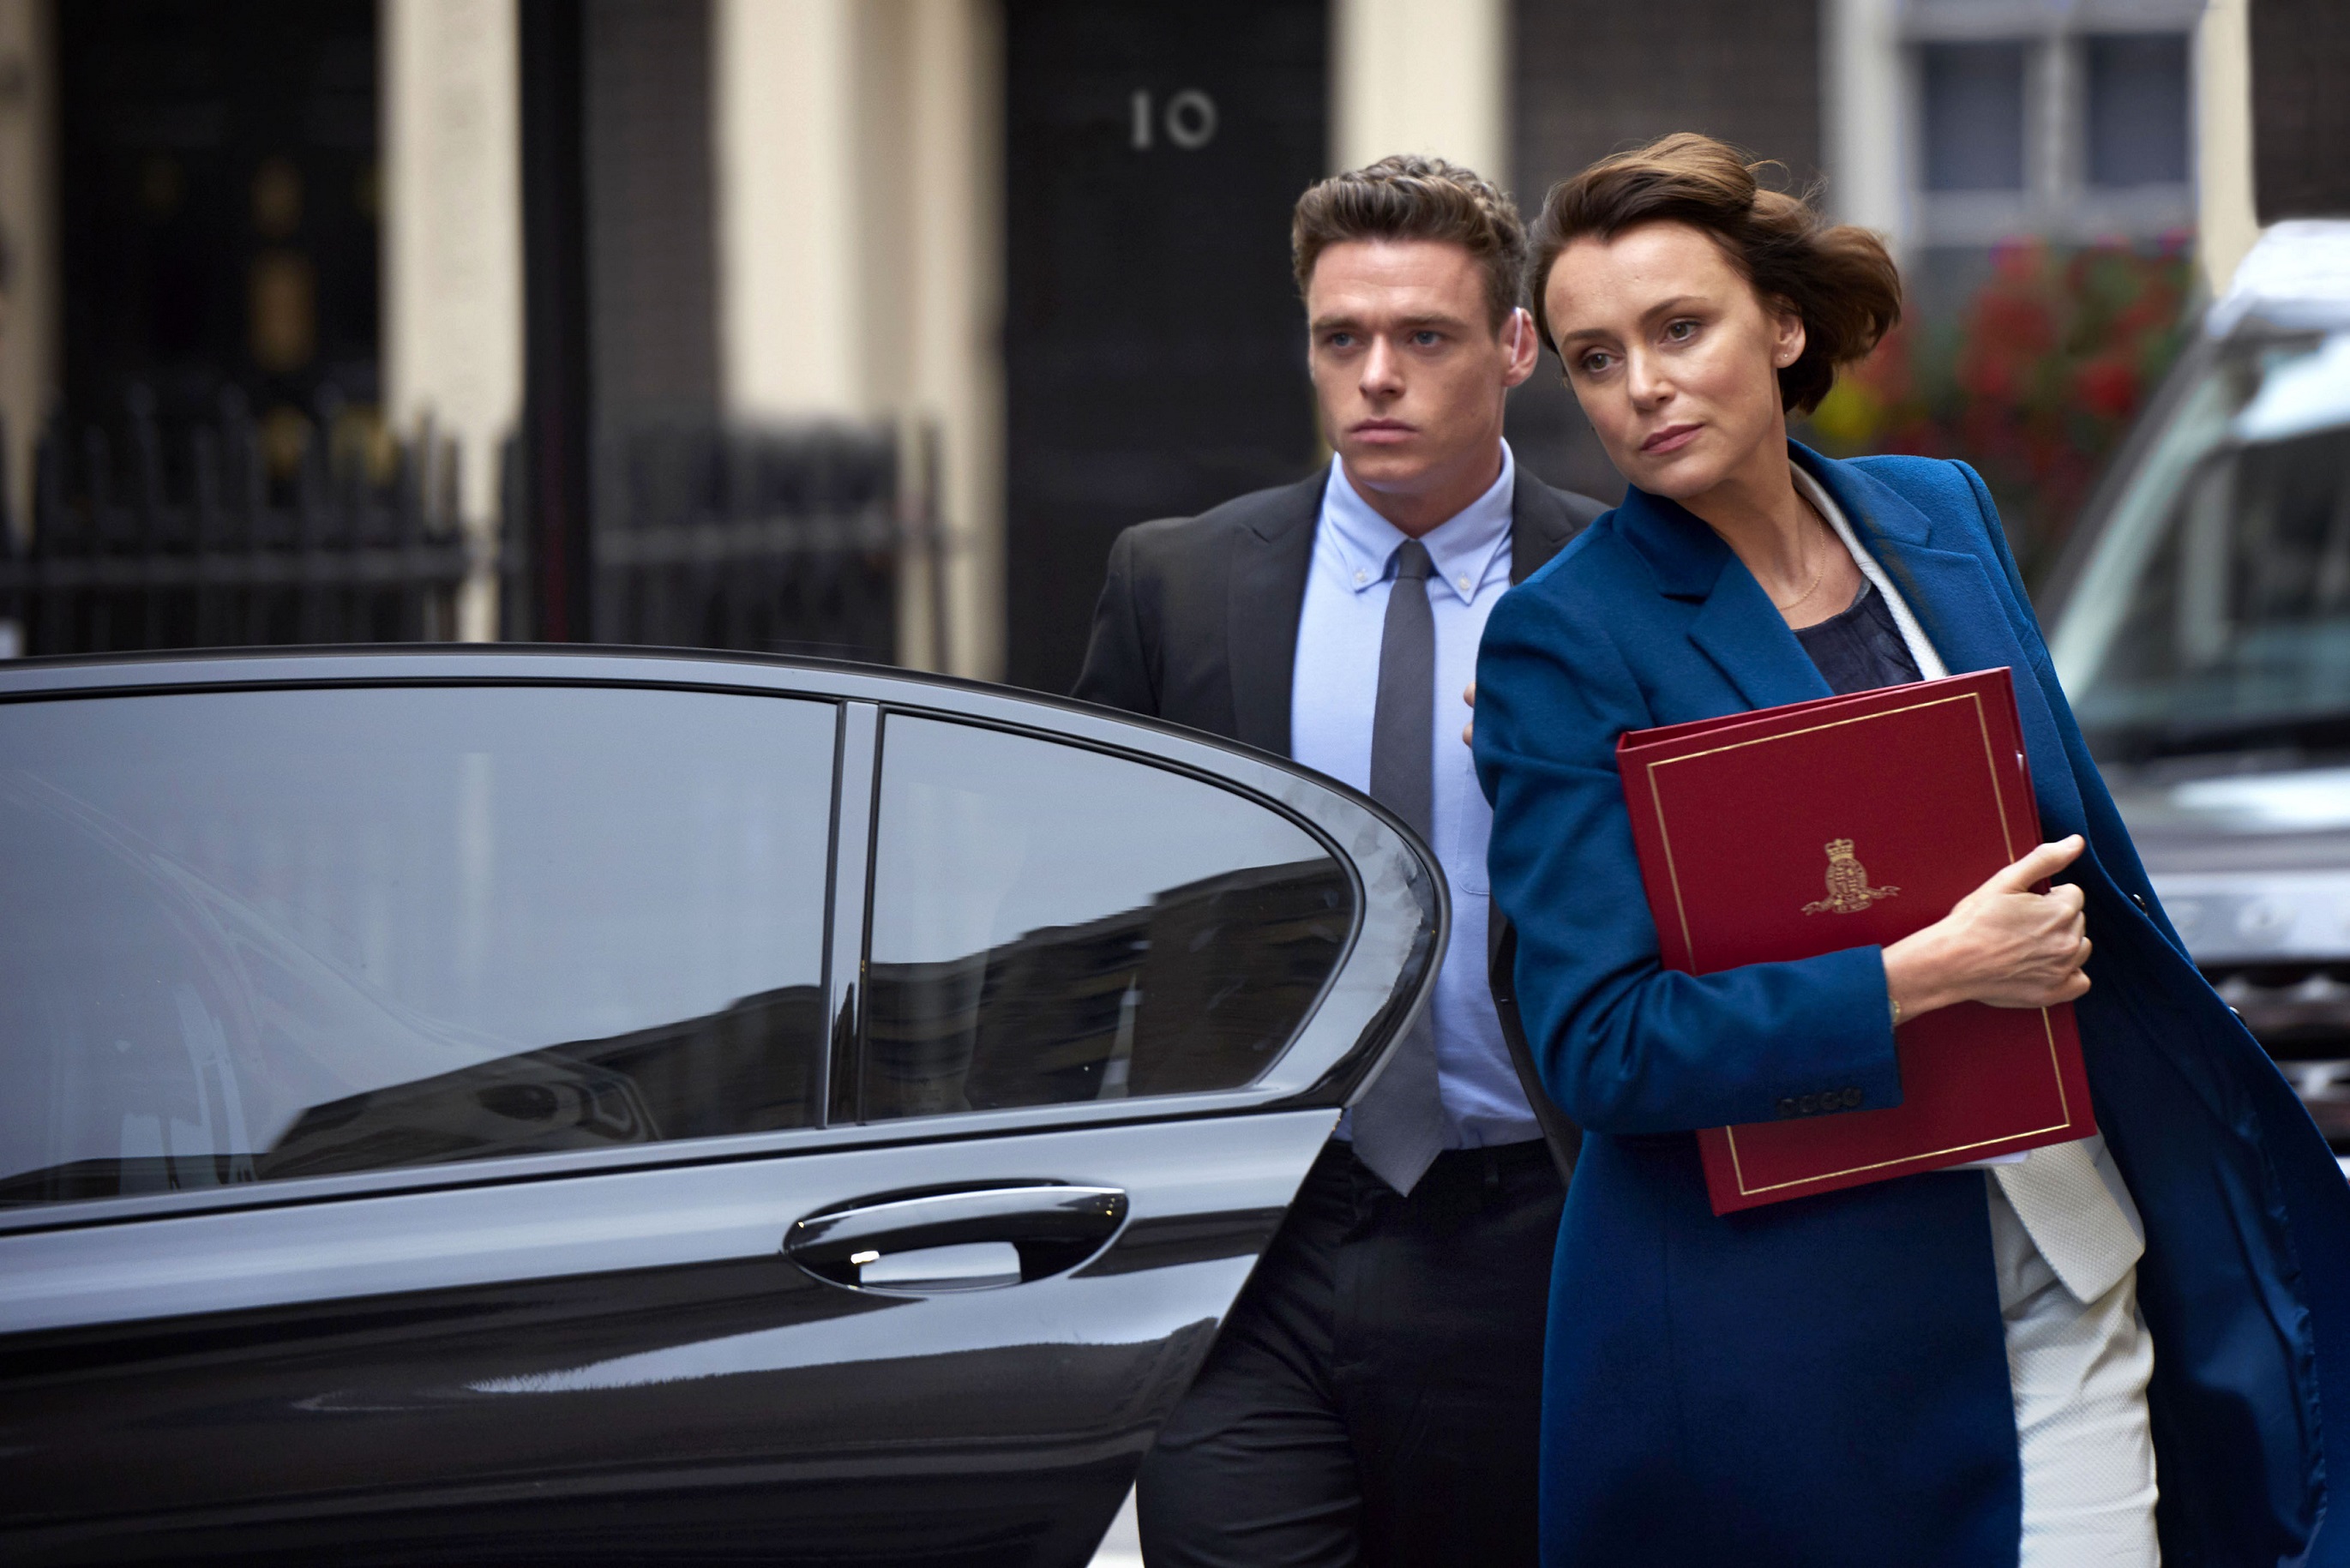 Richard Madden starred with Keeley Hawes in Bodyguard 